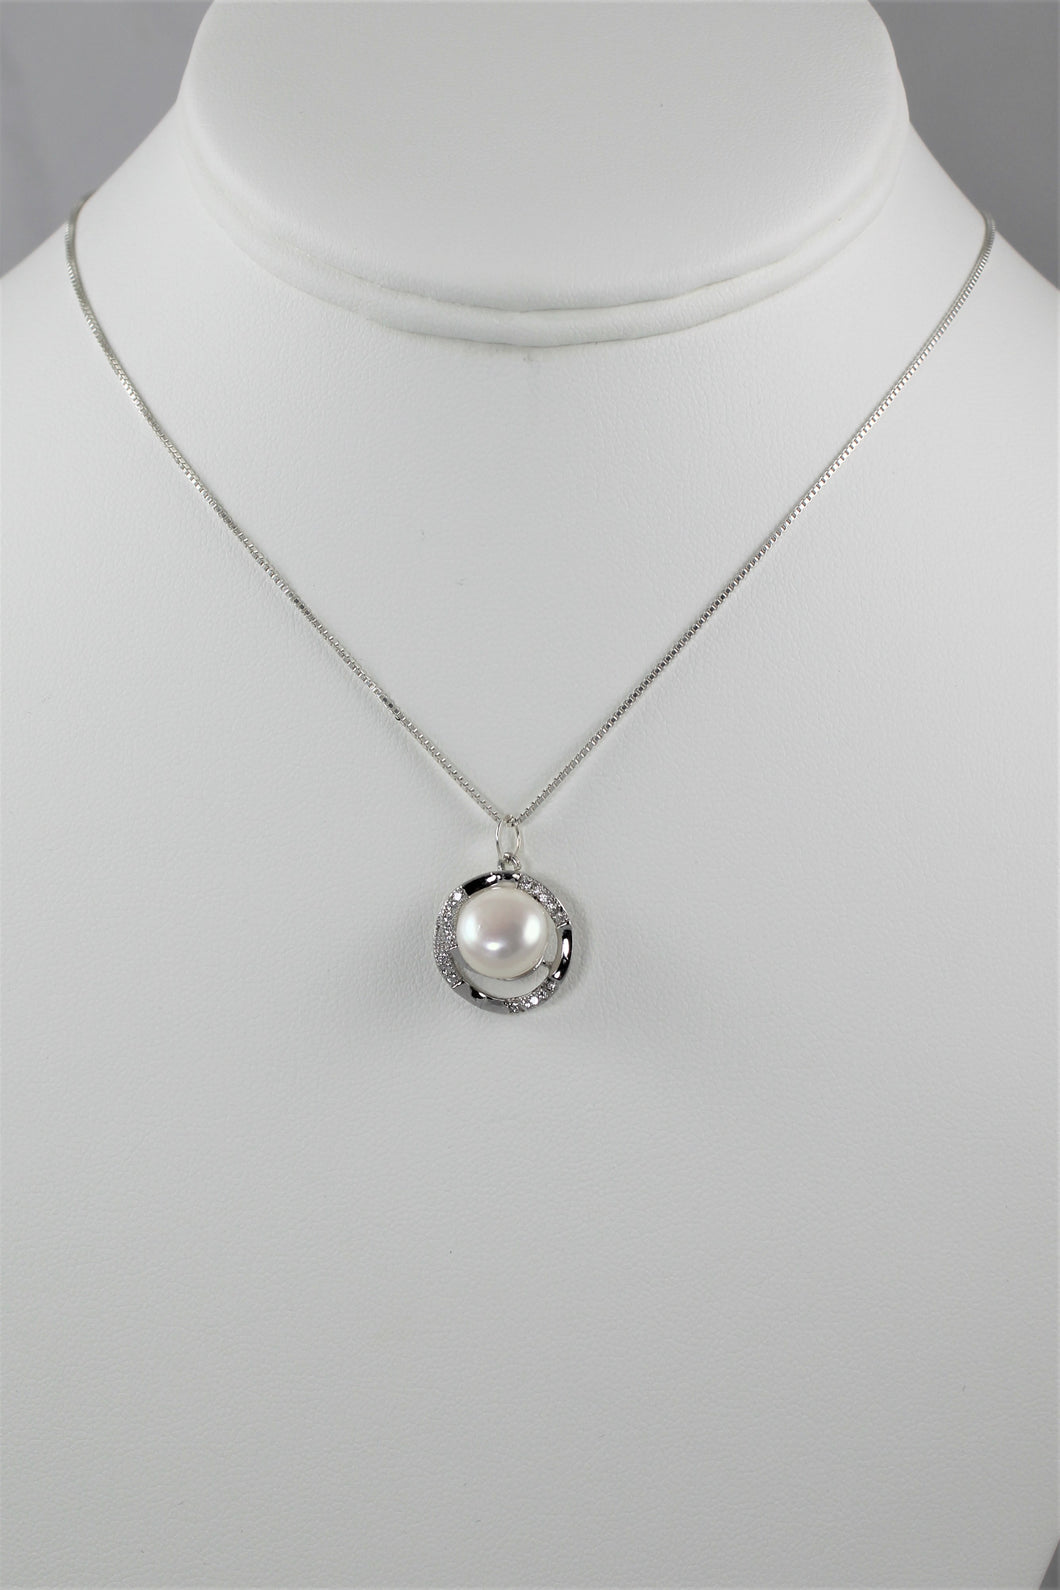 Pearl and White Topaz Necklace